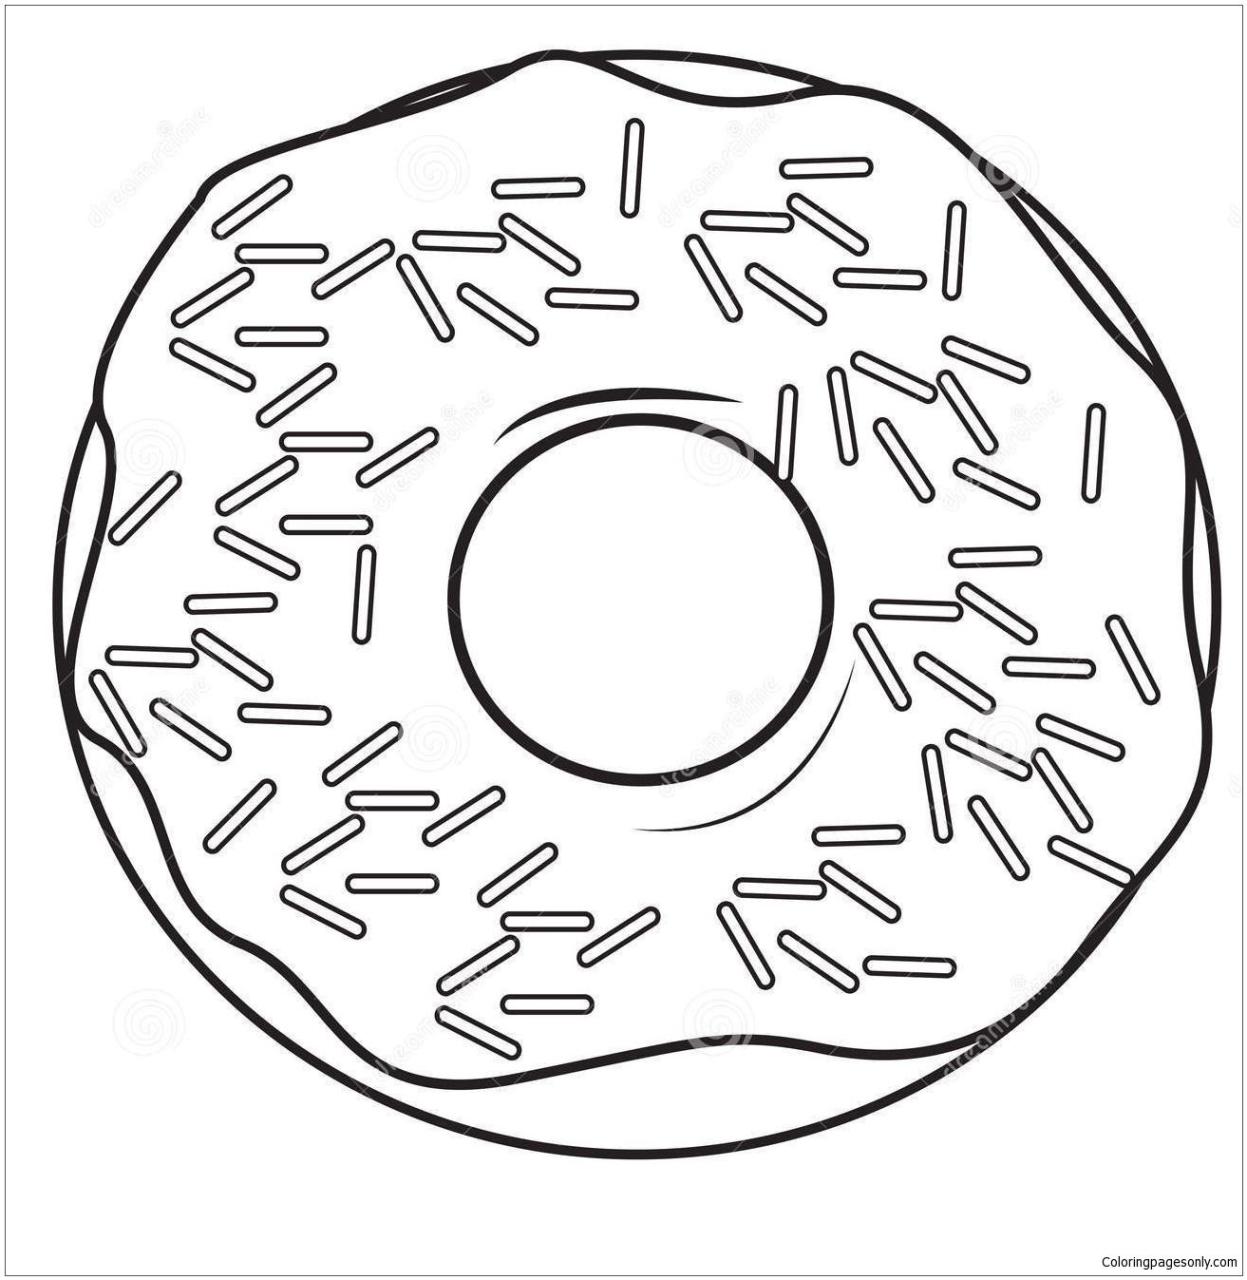 Donut Coloring Page, Free Coloring page Donut, Free Coloring Page